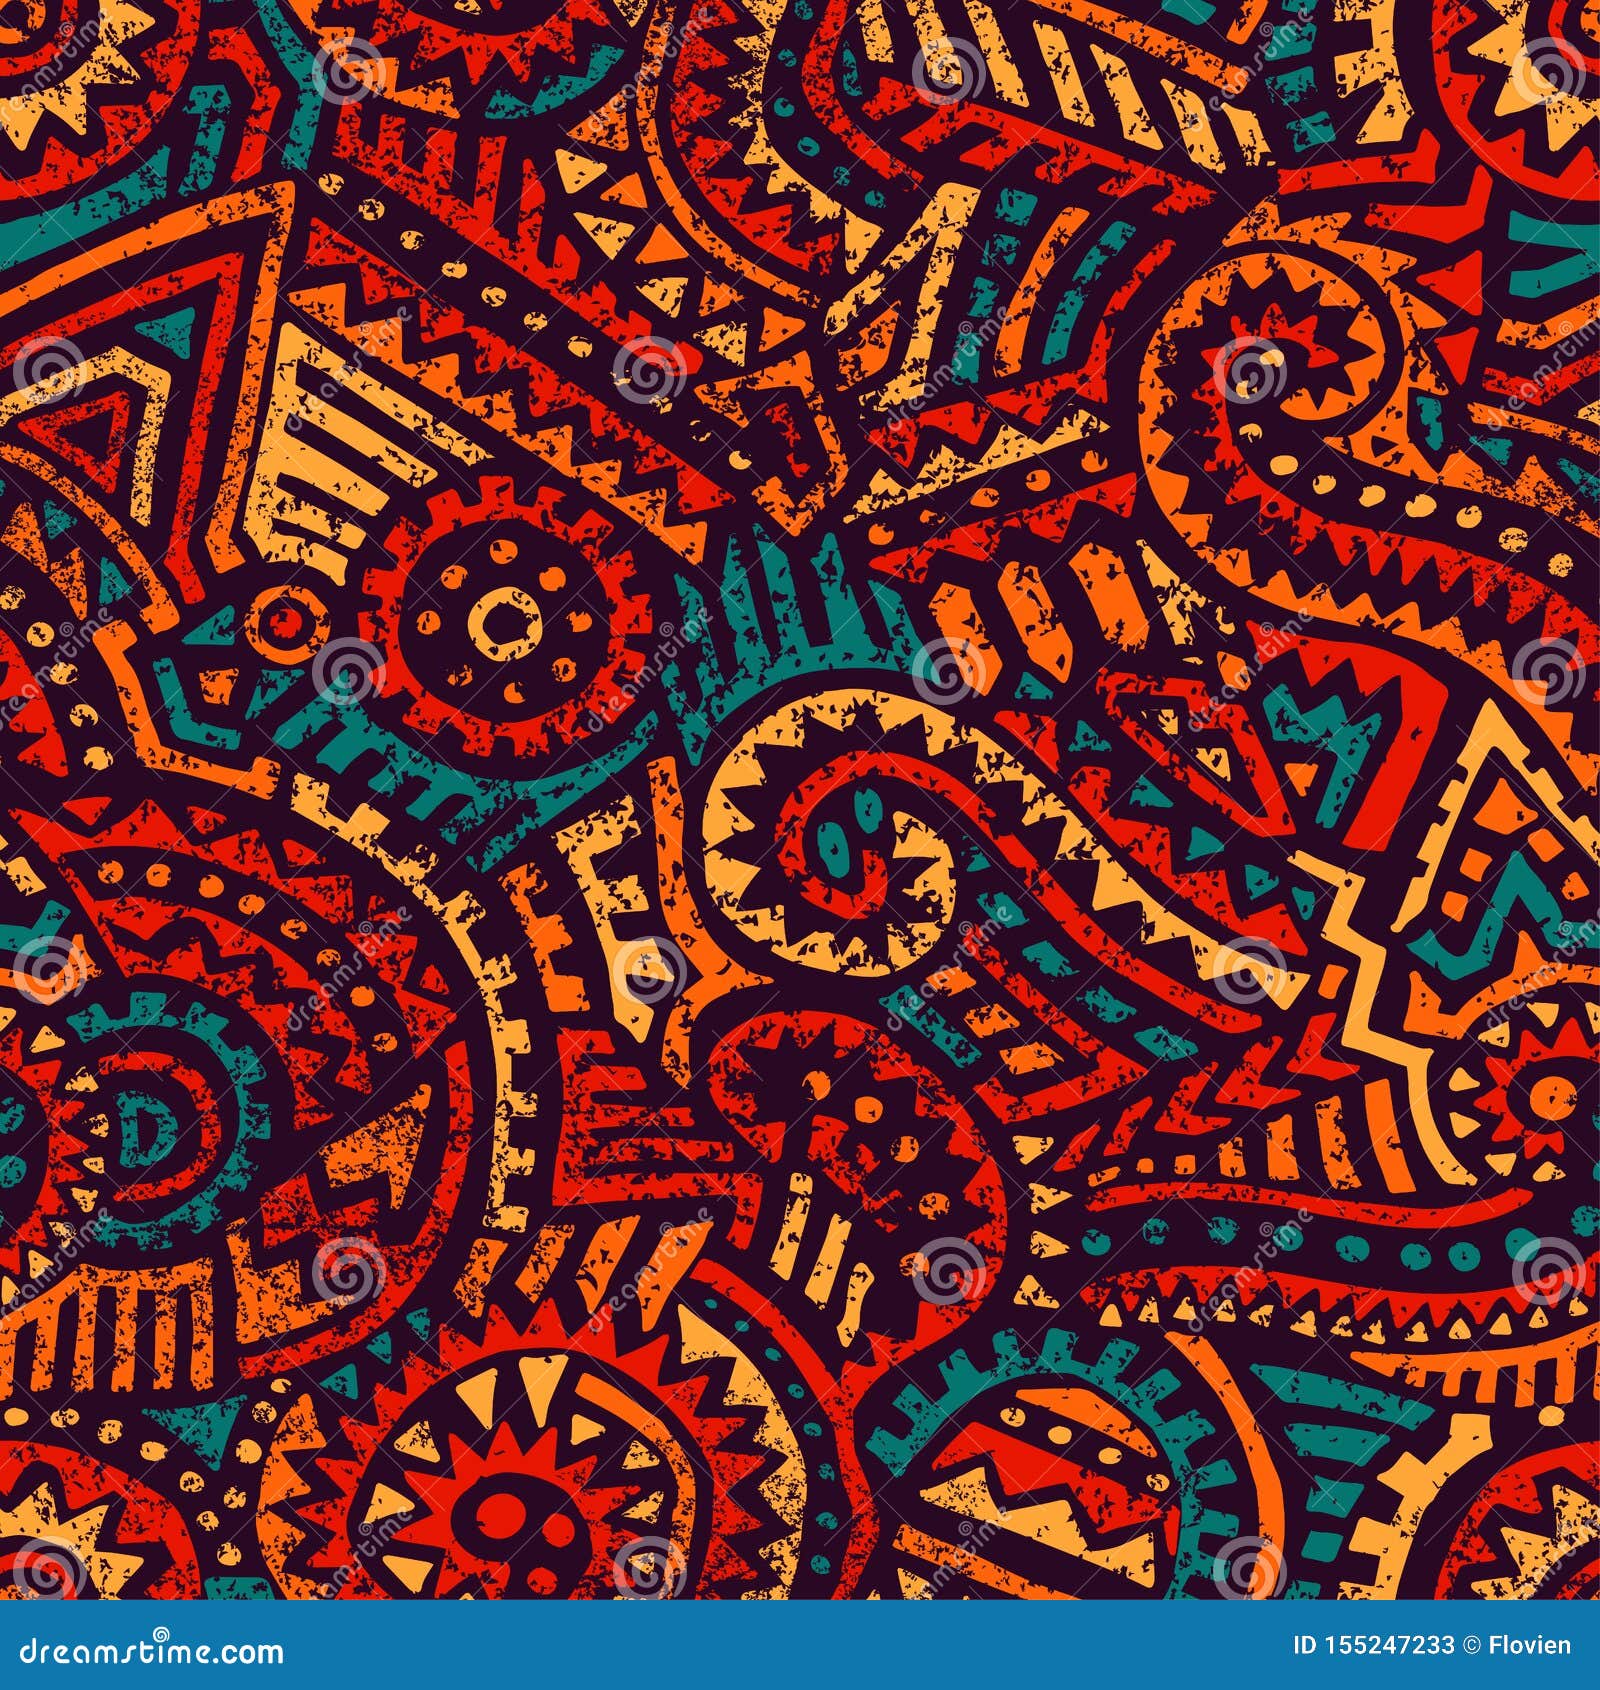 seamless african pattern. ethnic and tribal motifs. orange, red, yellow, blue and black colors. grunge texture. vintage print for